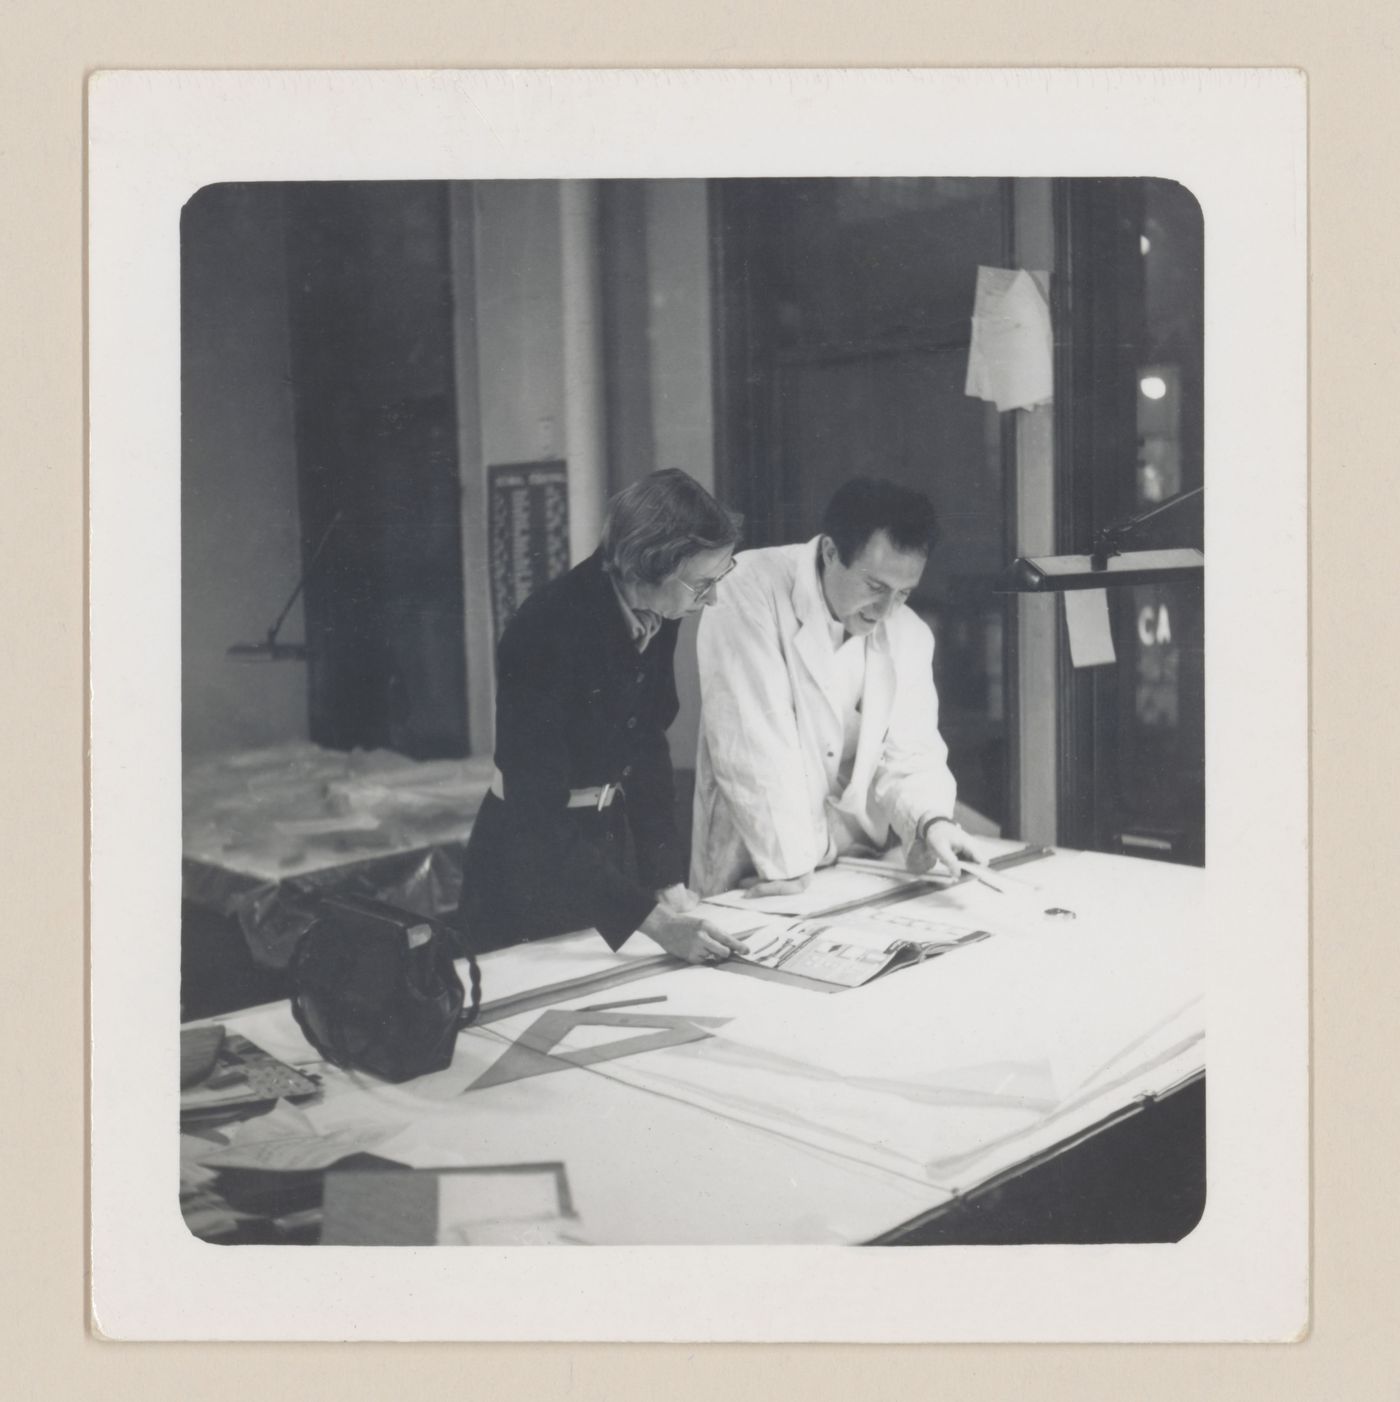 Edith Farnsworth and Myron Goldsmith in the Mies van der Rohe office, Chicago